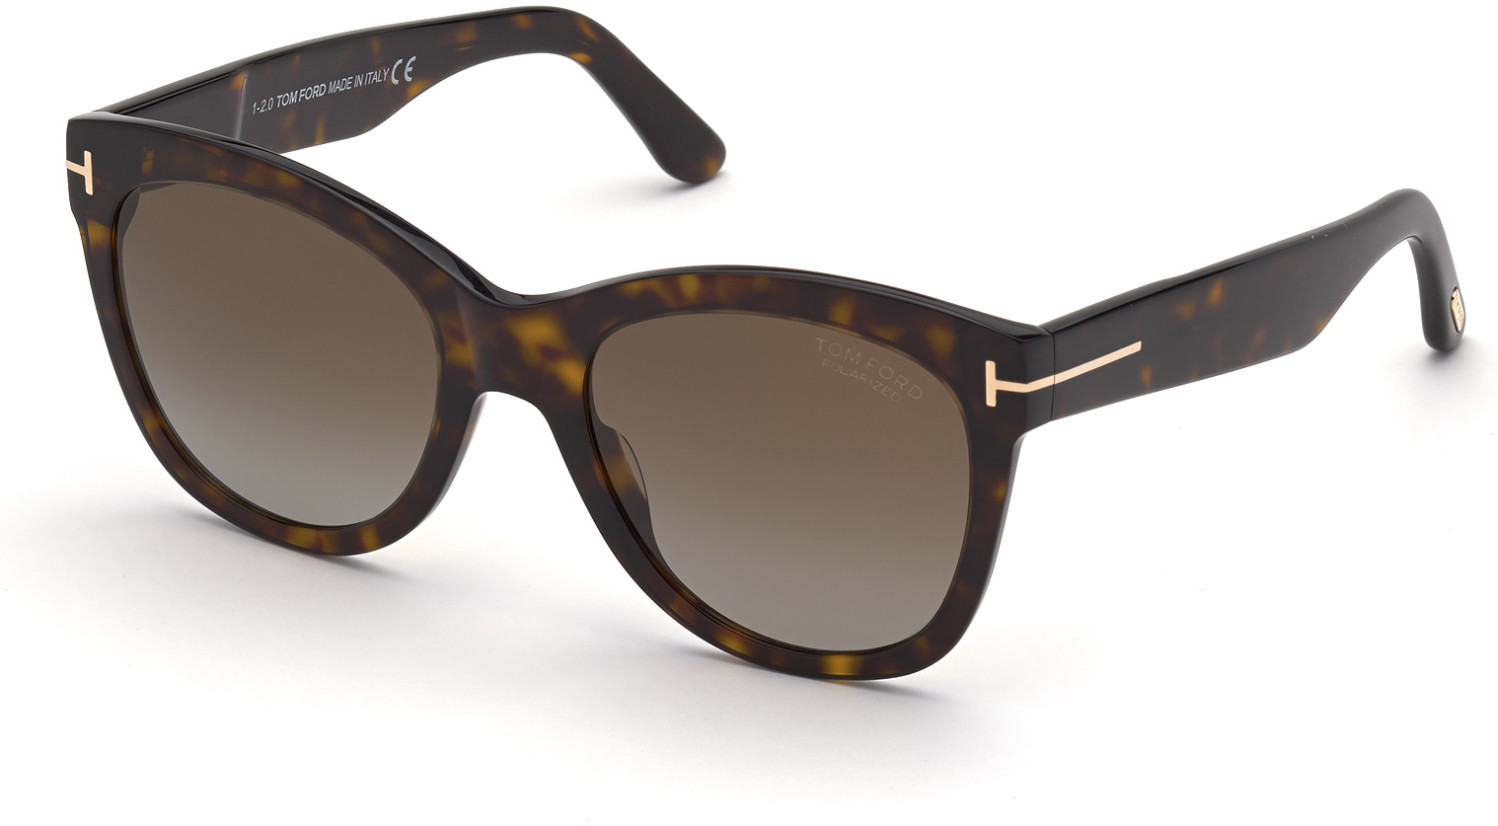 TOM FORD 0870 WALLACE 52H